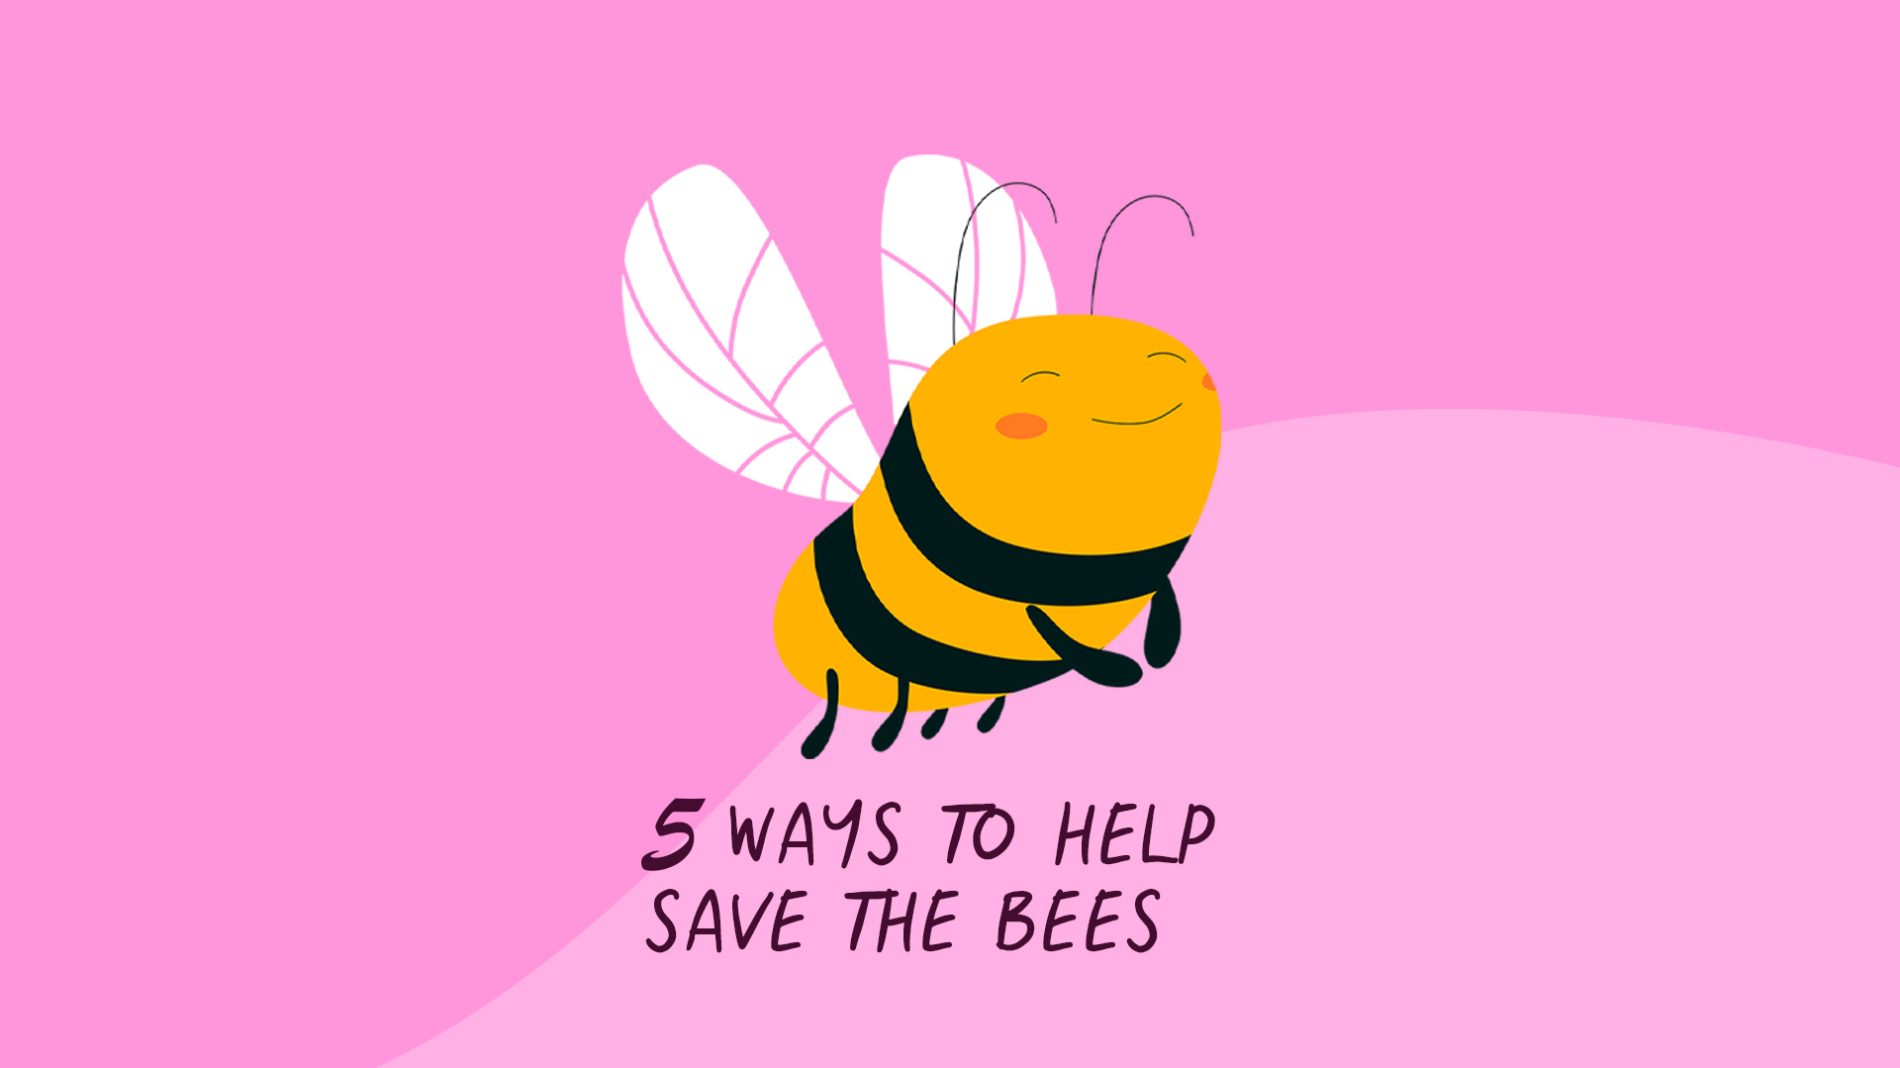 illustration of a smiling bee above text that says 5 ways to save the bees